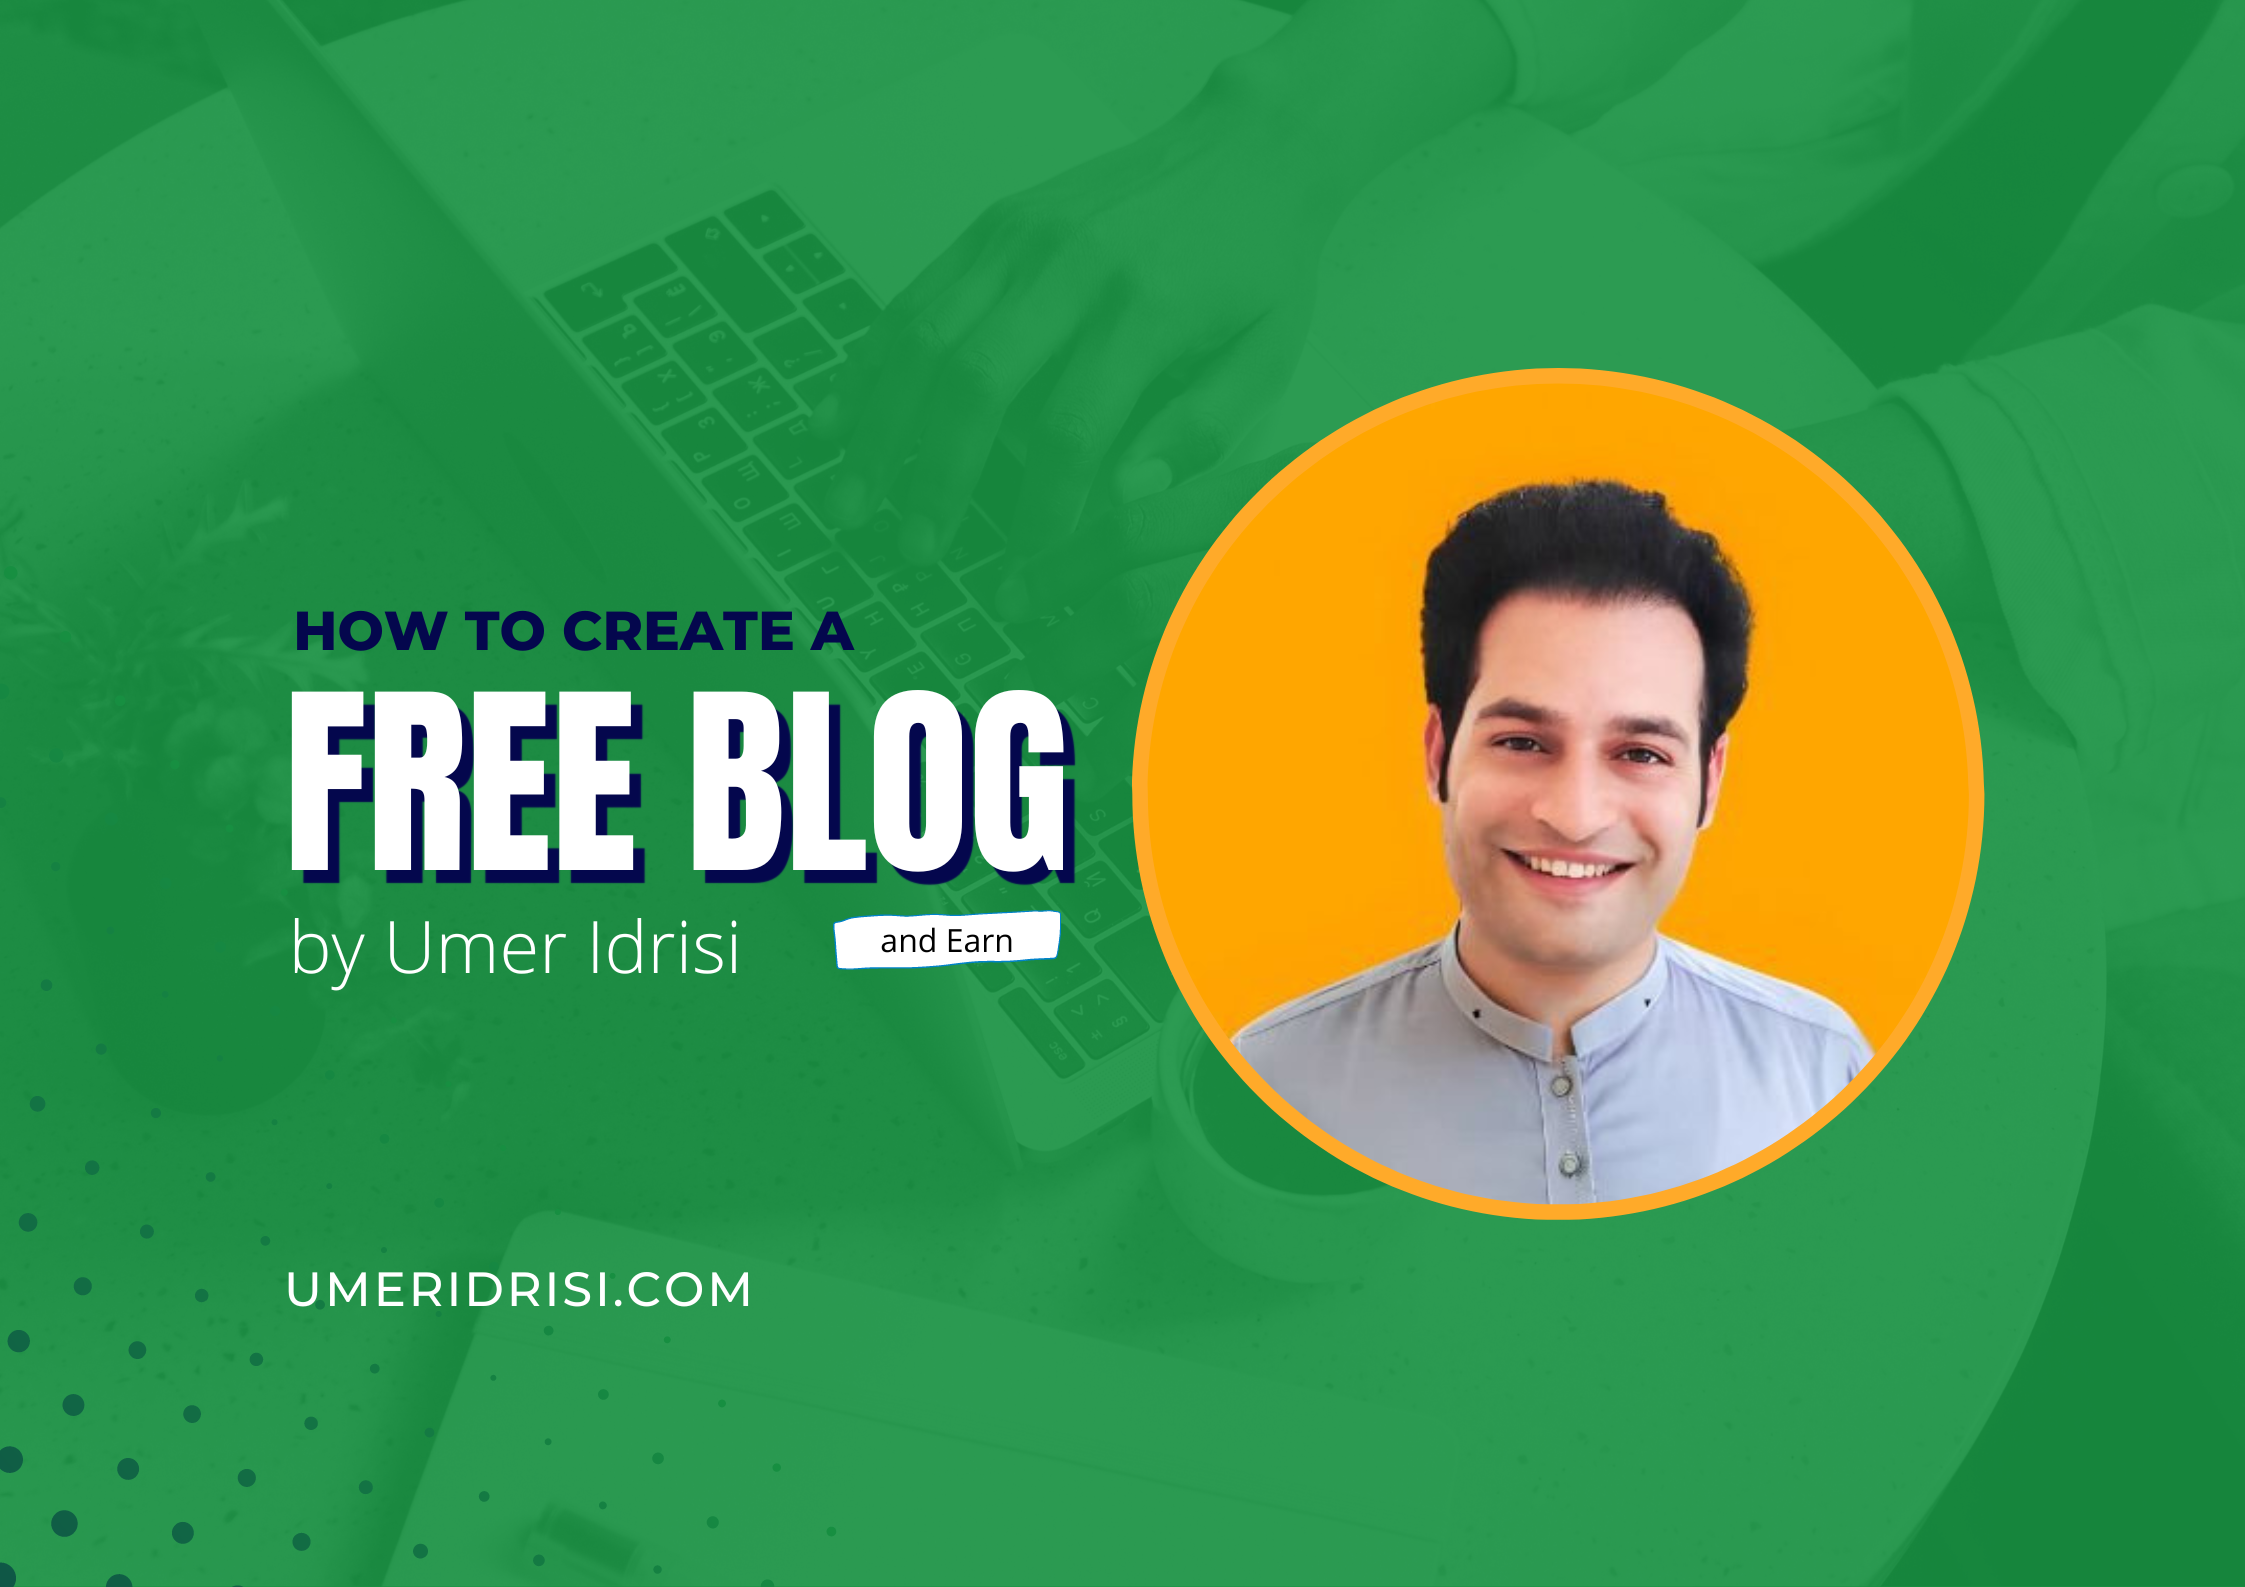 How to Create a Free Blog and Earn?